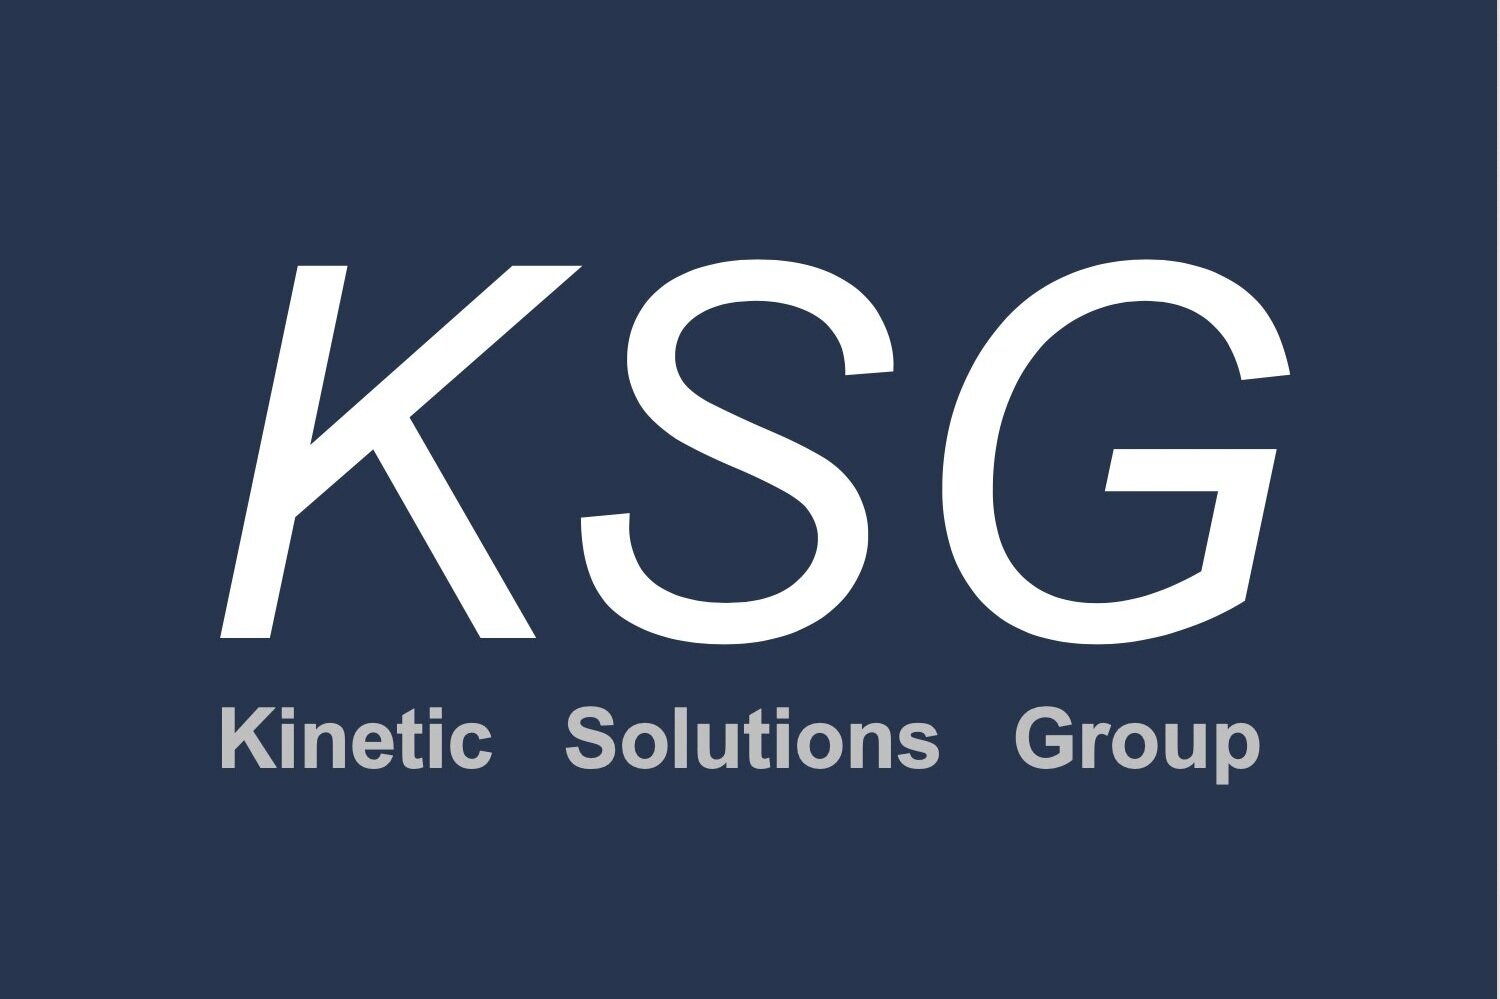 Kinetic Solutions Group